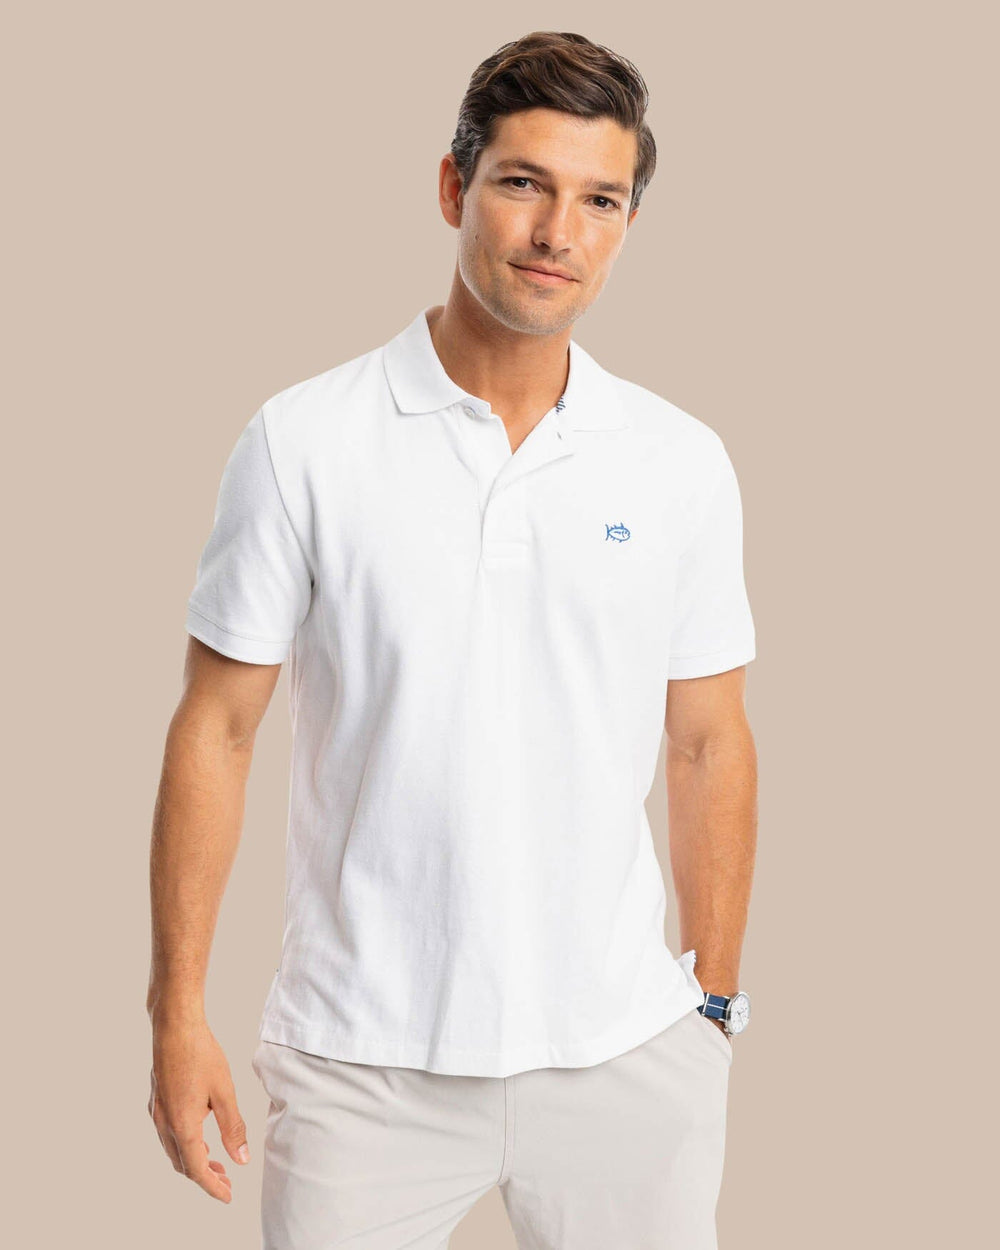 The model front view of the Men's New Skipjack Polo Shirt by Southern Tide - Classic White